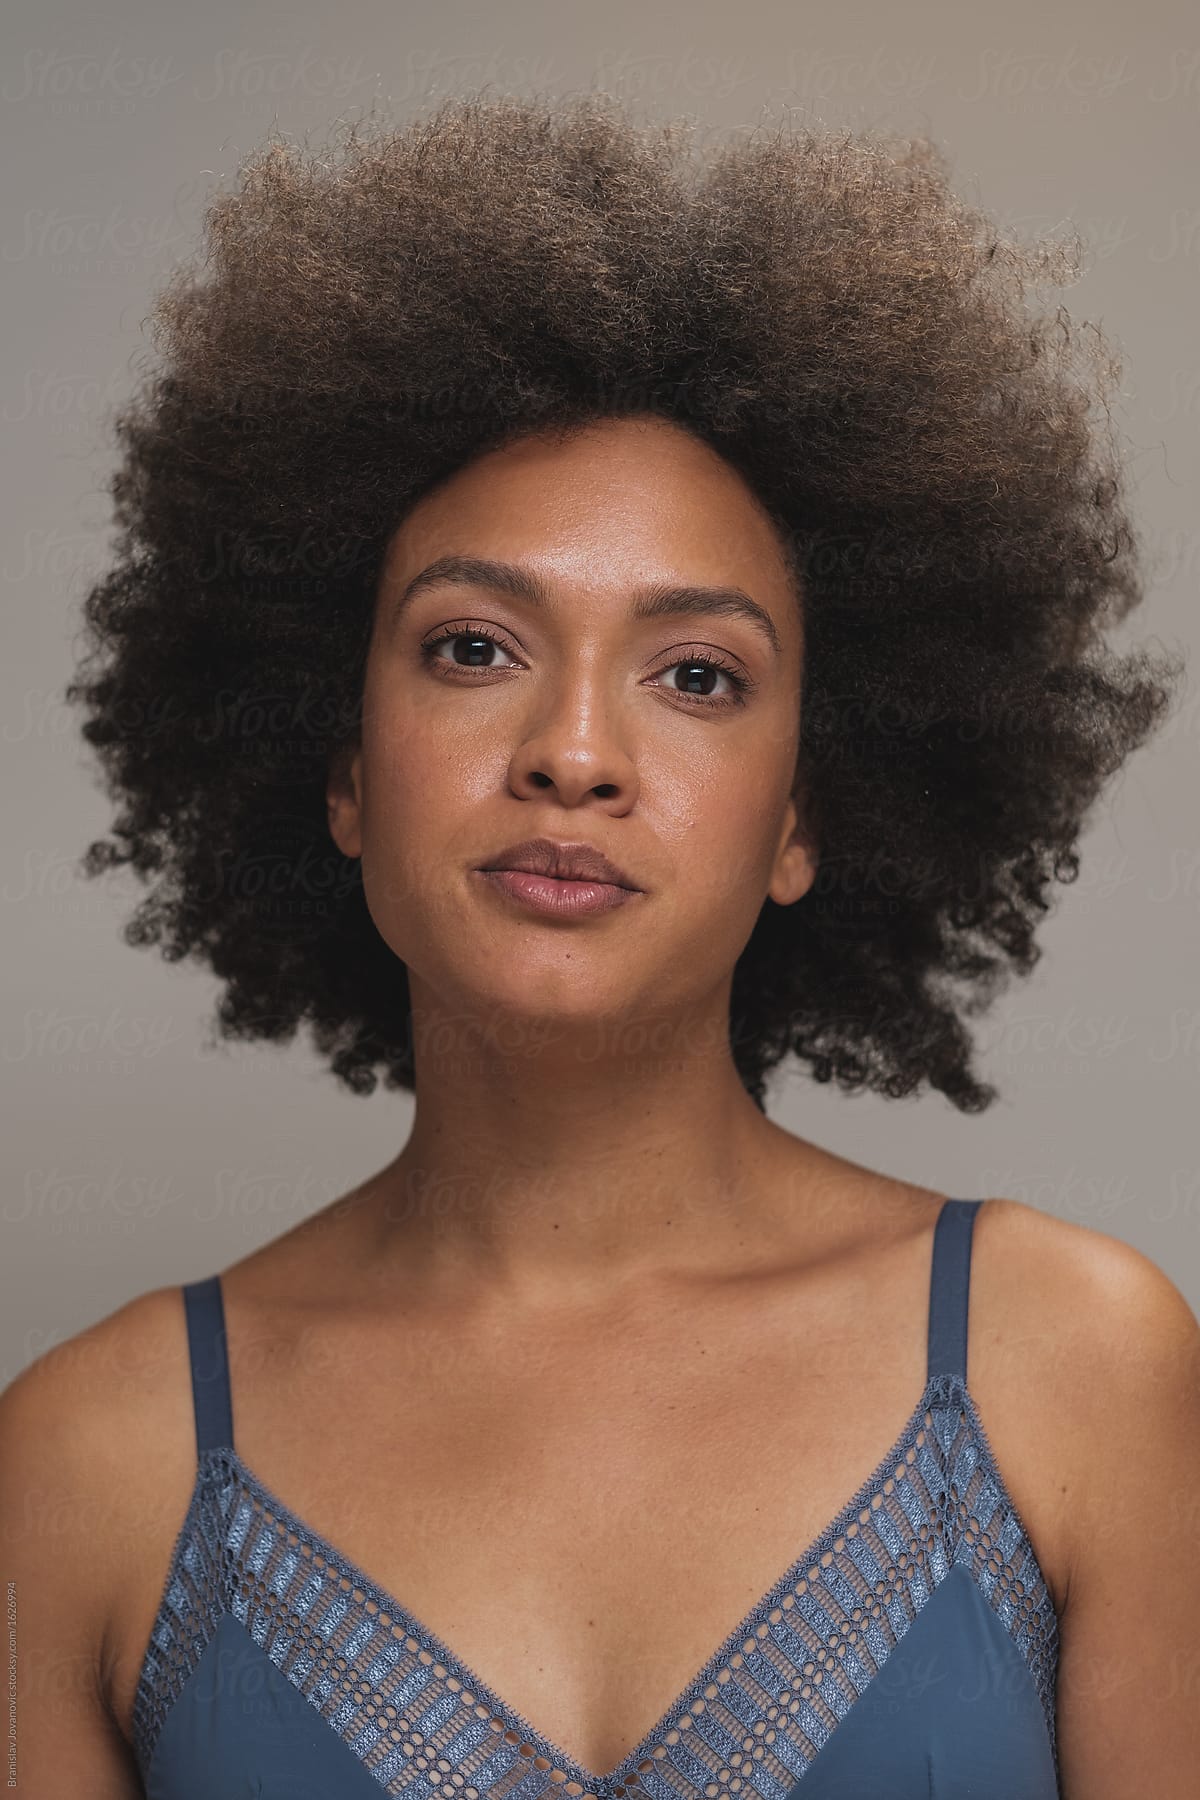 Beautiful Mixed Race Woman With Afro Hairstyle Wearing Bra By Stocksy